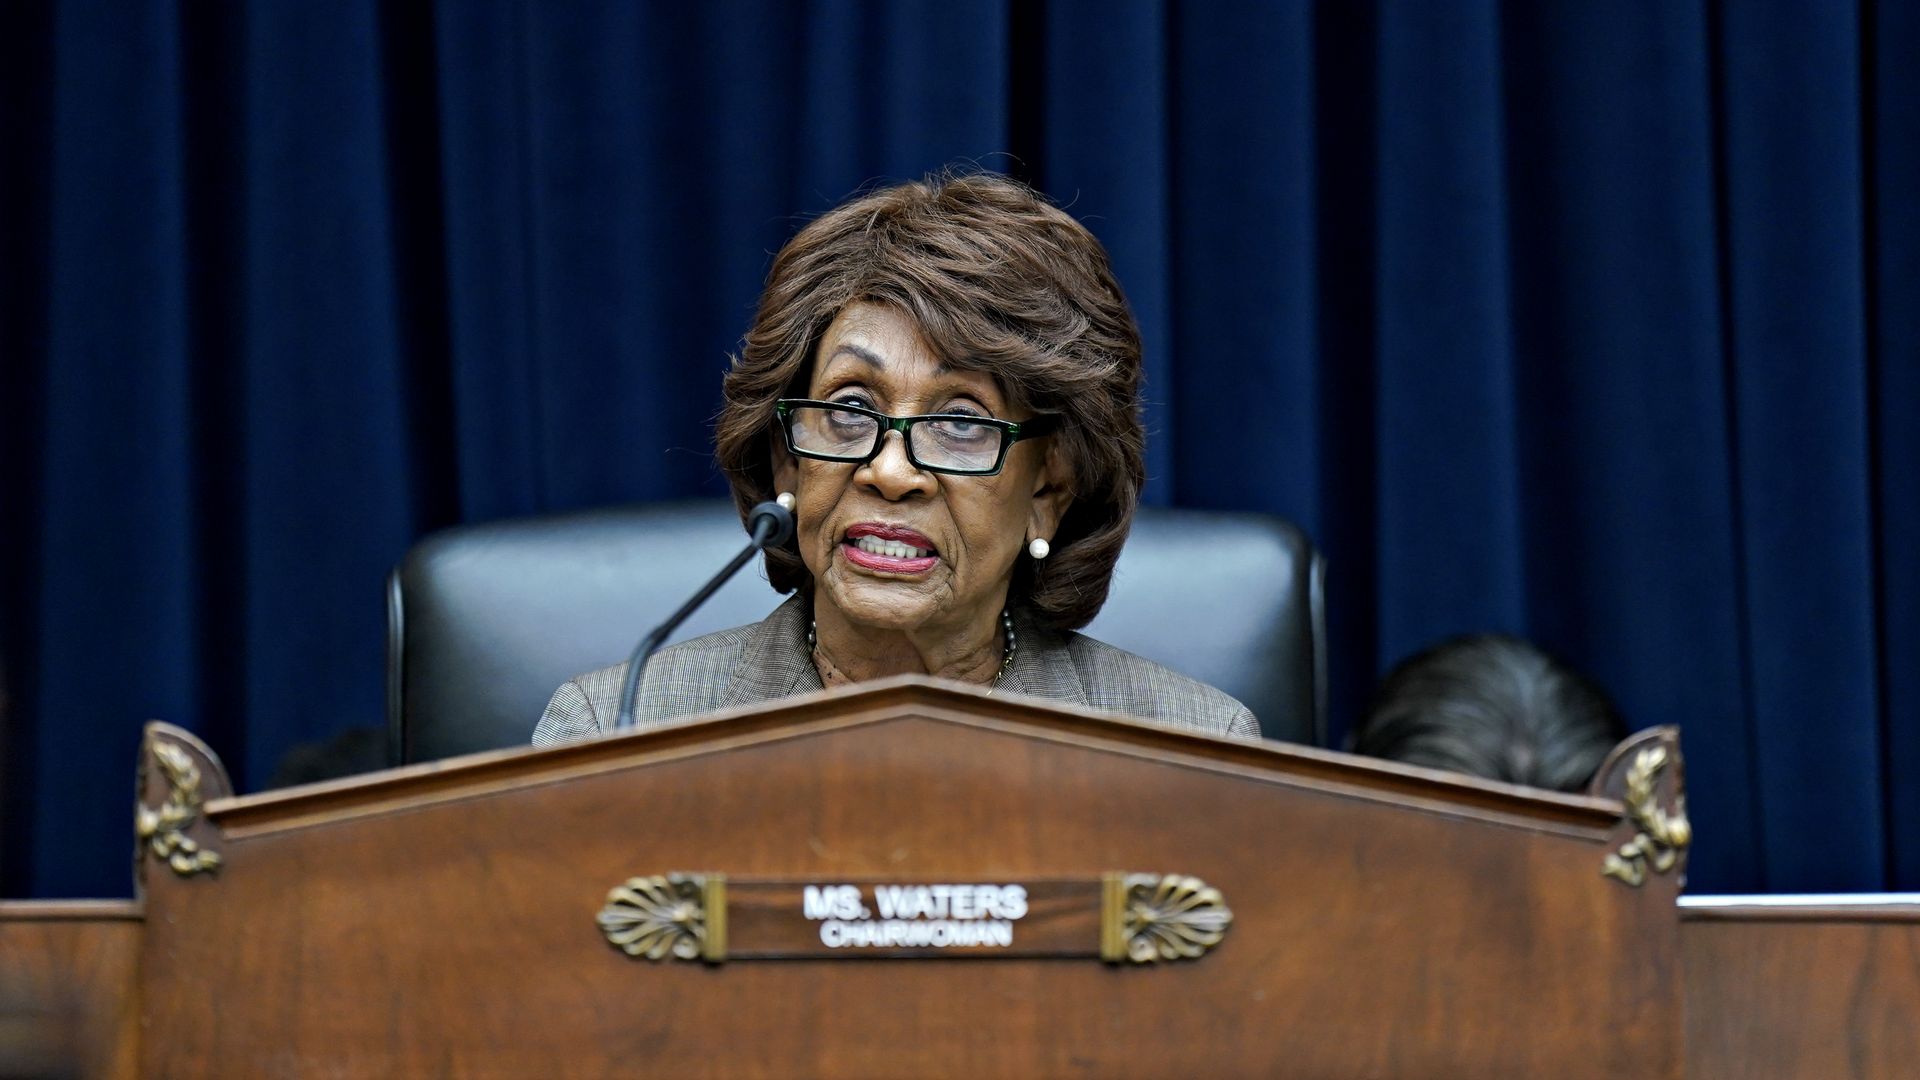 Maxine Waters, wearing glasses and a gray suit behind a committee dais.